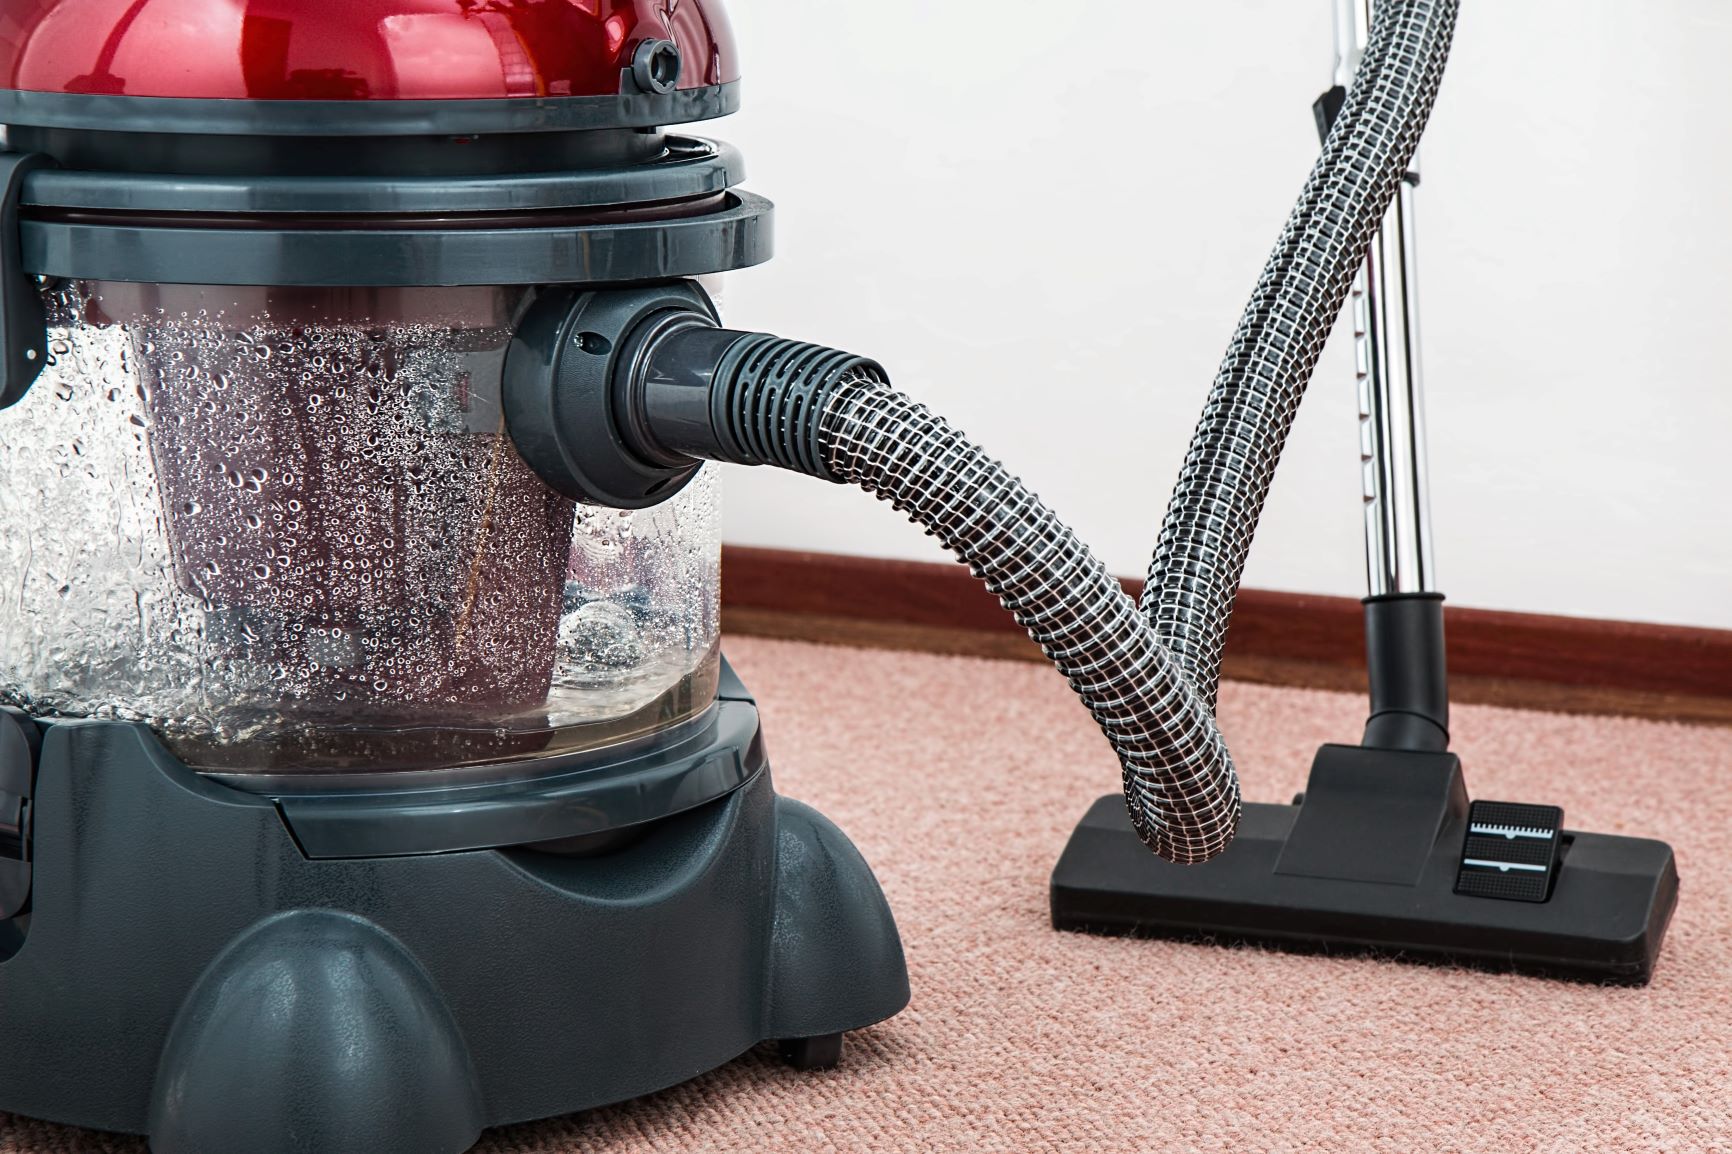 Can You Clean Carpet With Laundry Detergent?